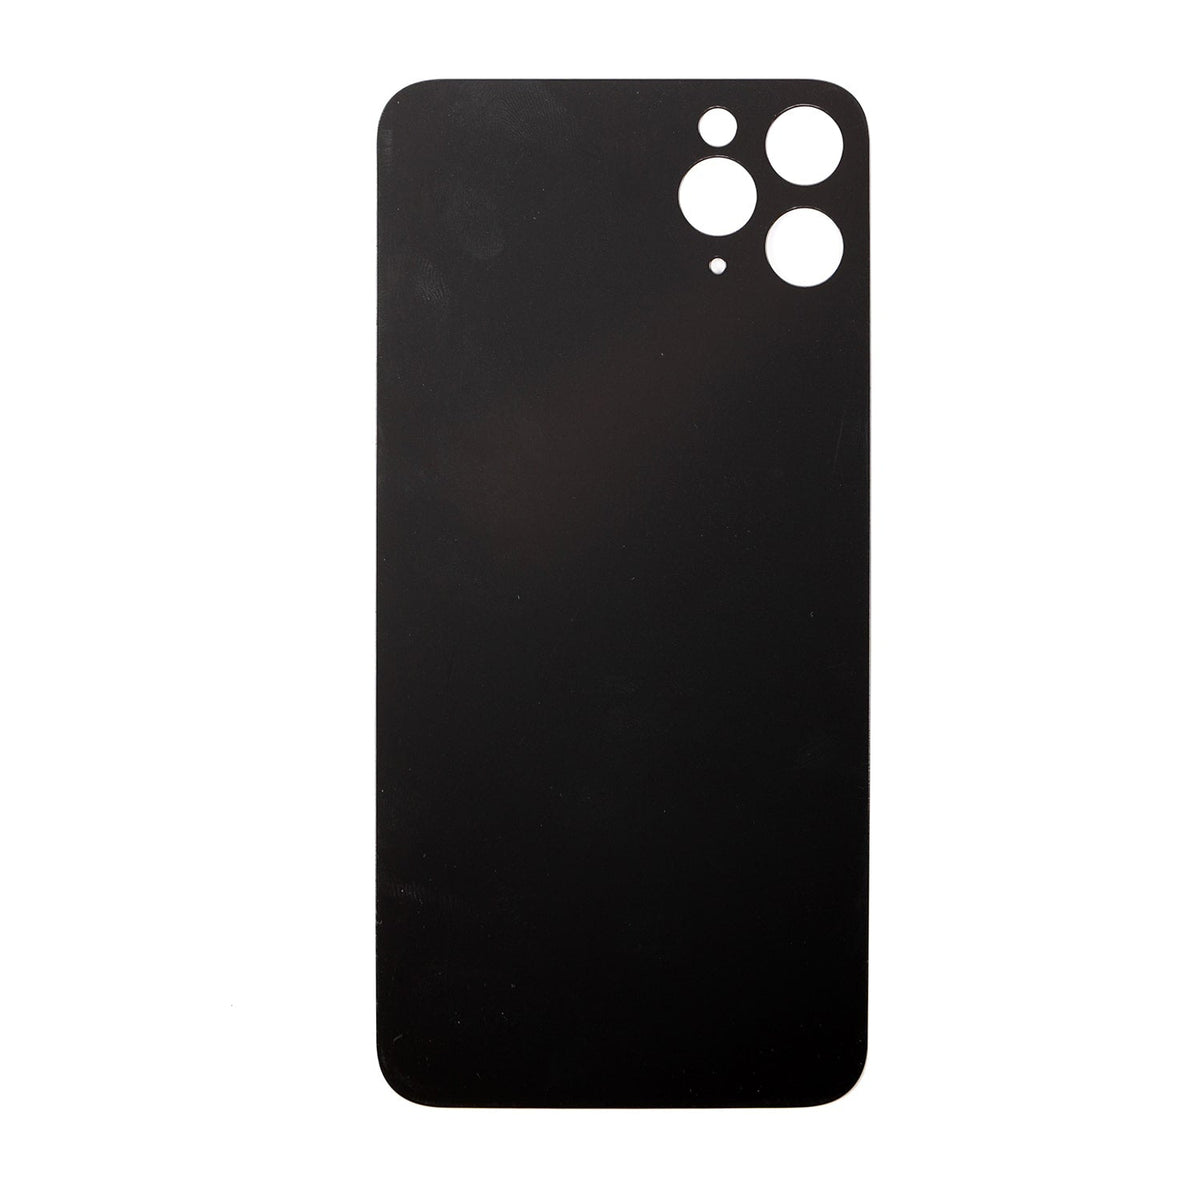 BACK COVER - SPACE GRAY FOR IPHONE 11 PRO